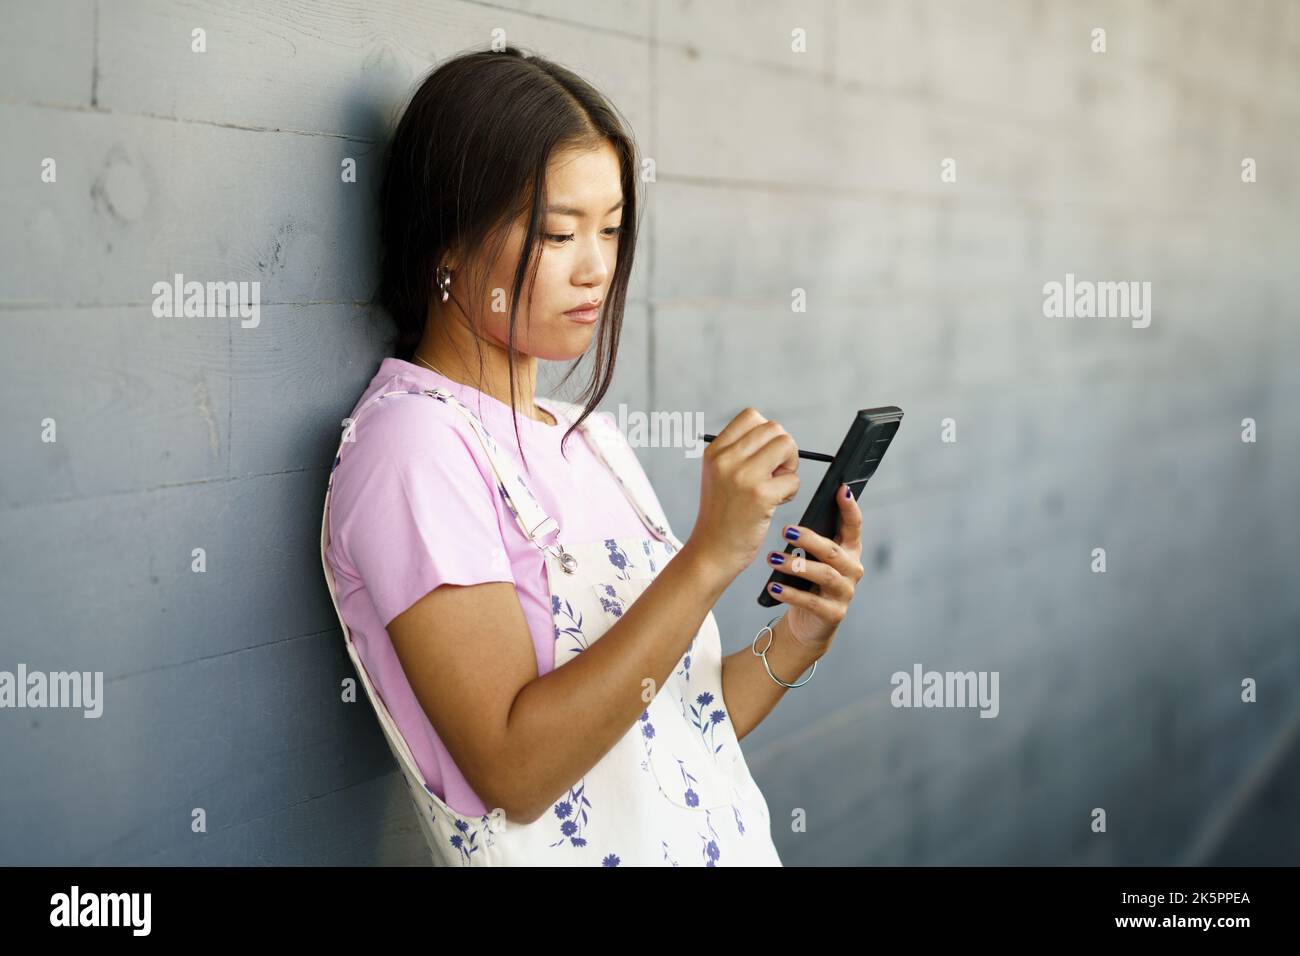 Serious Chinese girl using her smartphone with a pen or stylus,outdoors Stock Photo